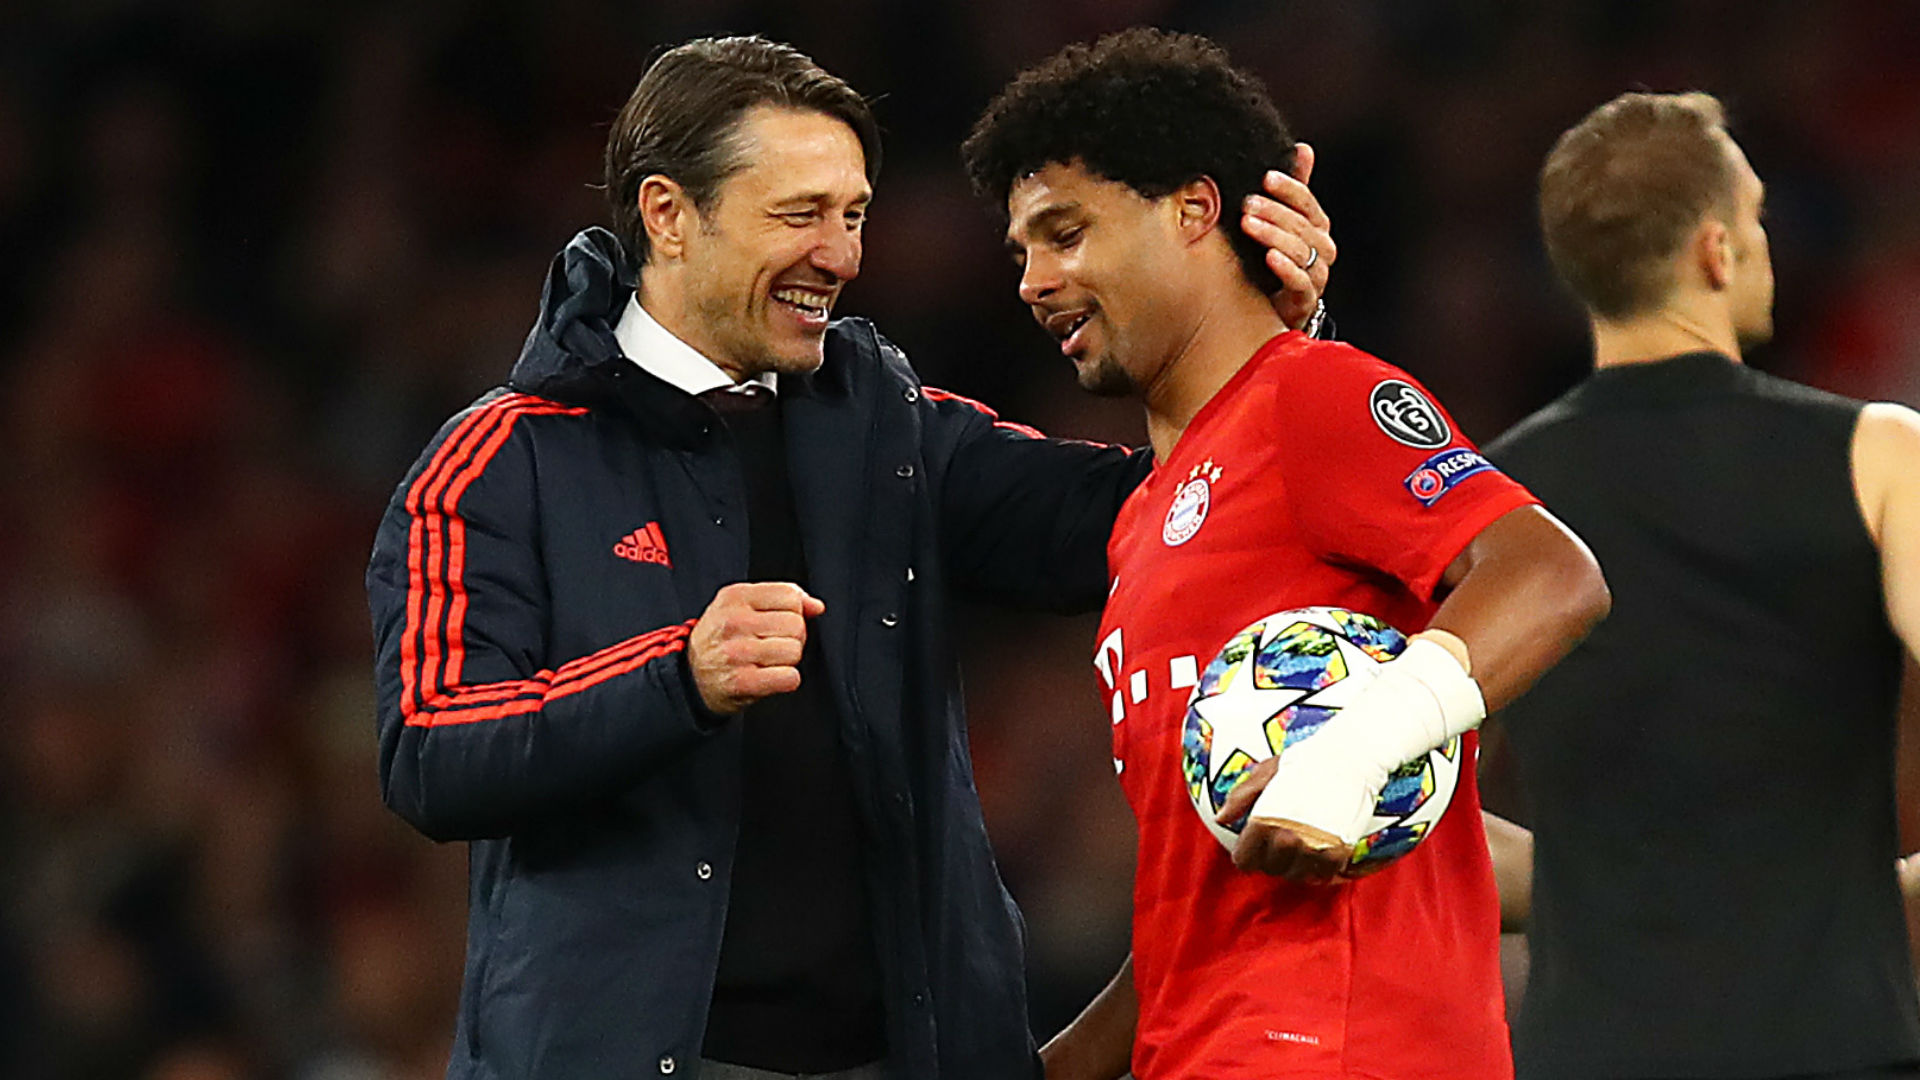 Bayern Munich demolished Tottenham 7-2 in the Champions League on Tuesday, leaving Niko Kovac amazed by his side.